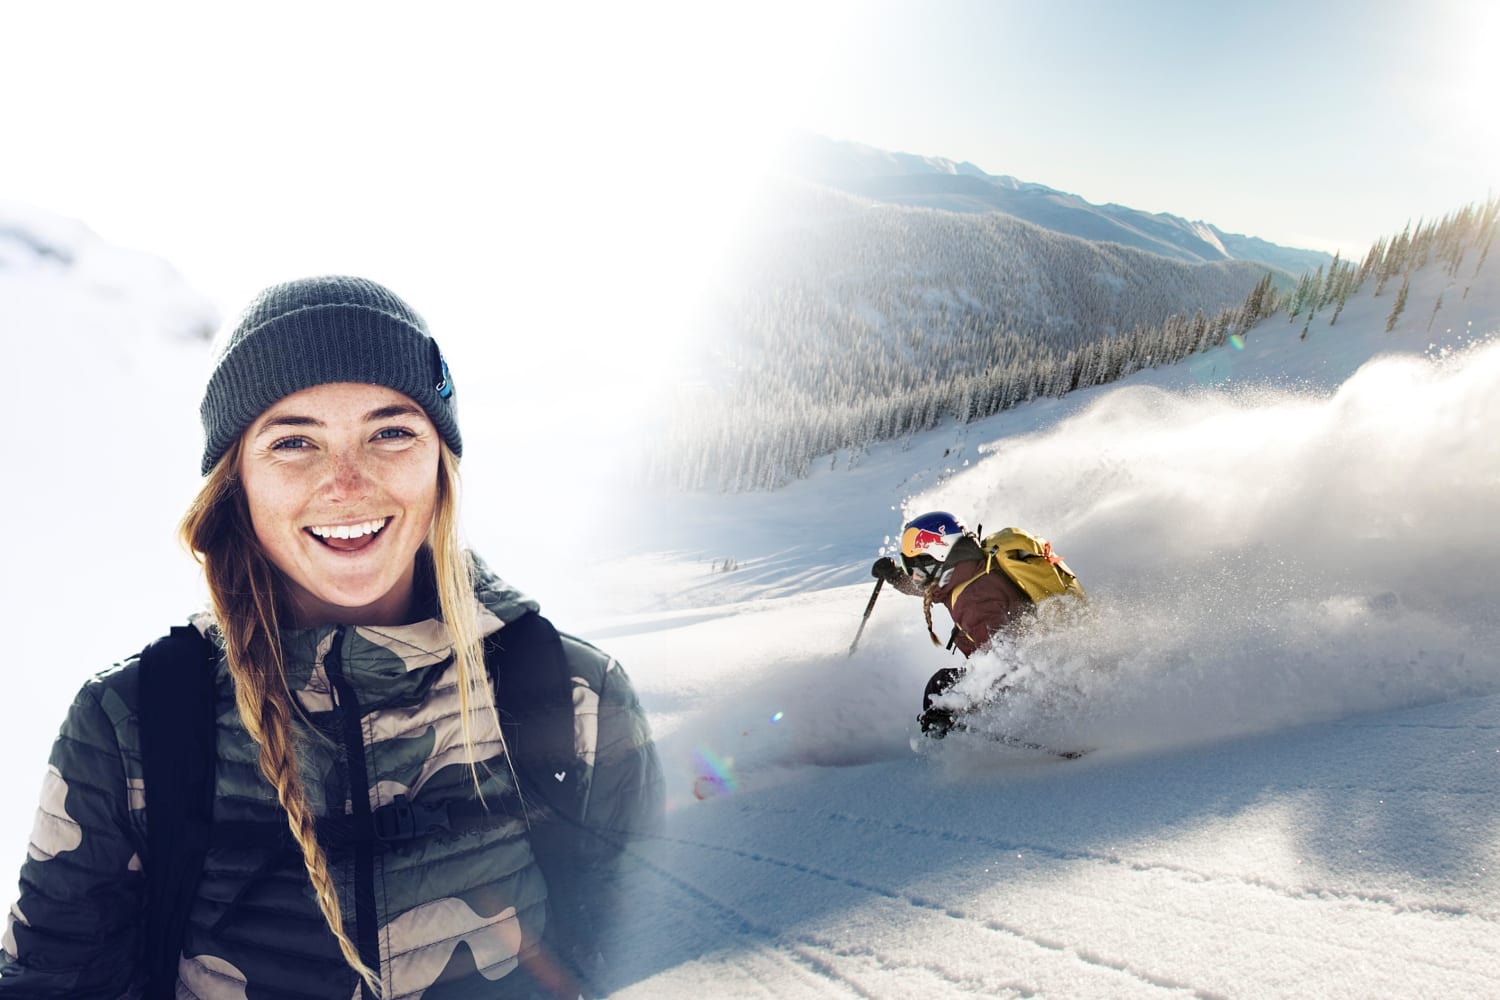 Best Female Ski Videos: 7 clips you have to watch